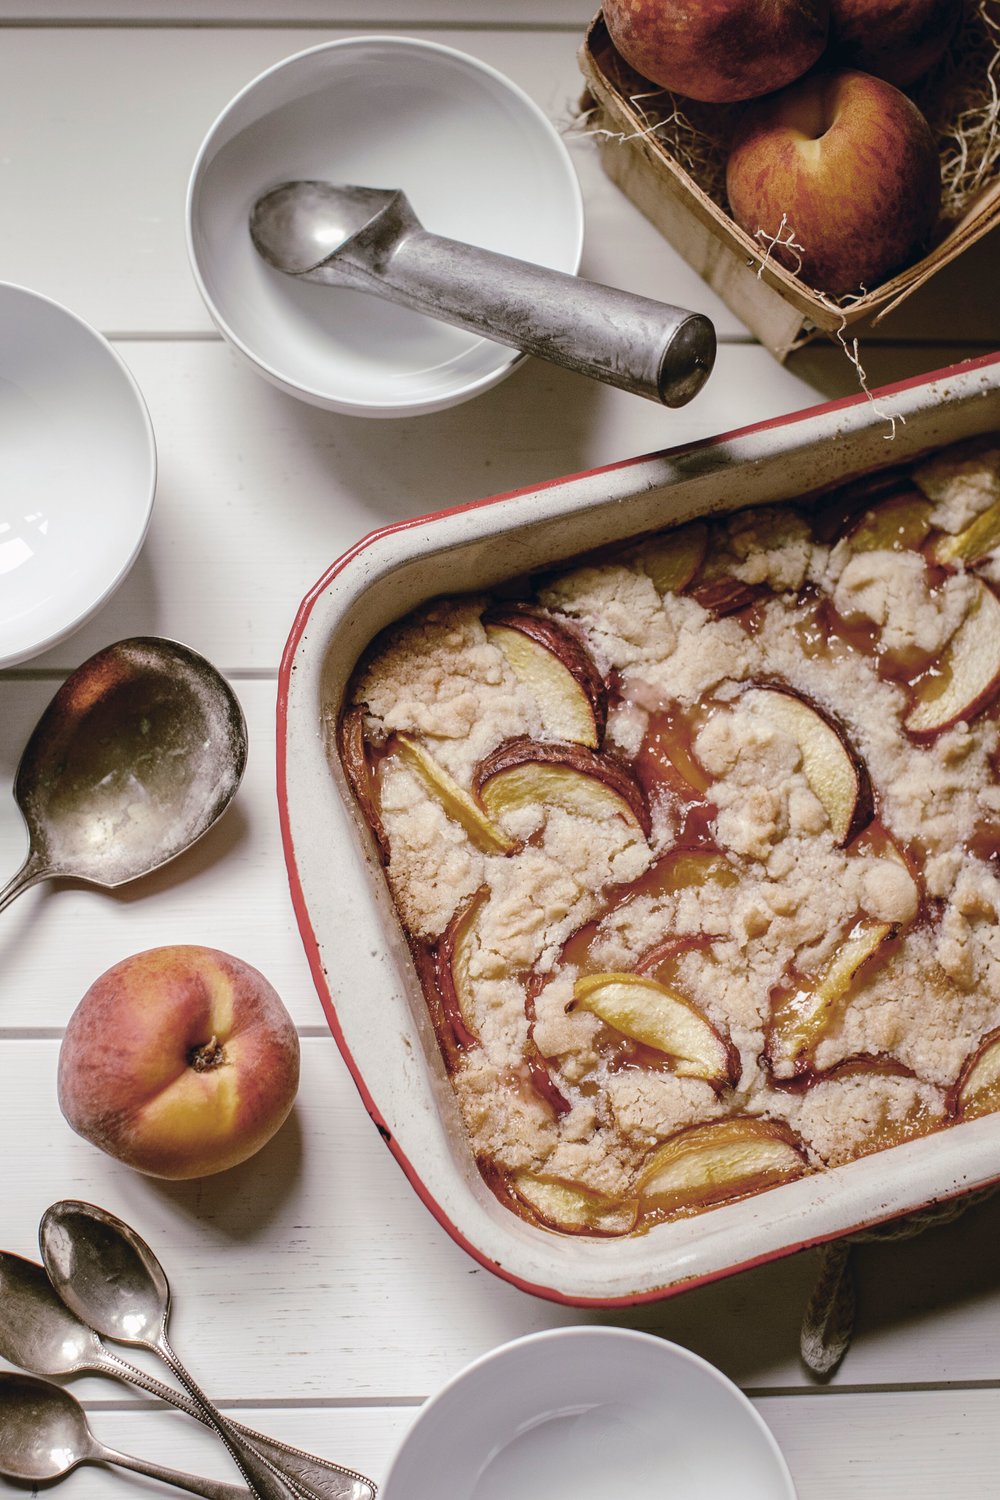 Learn how to make peach cobbler, a simple, classic dessert to make during the summer months. This easy recipe for peach cobbler uses fresh peaches that are full of color and flavor. 